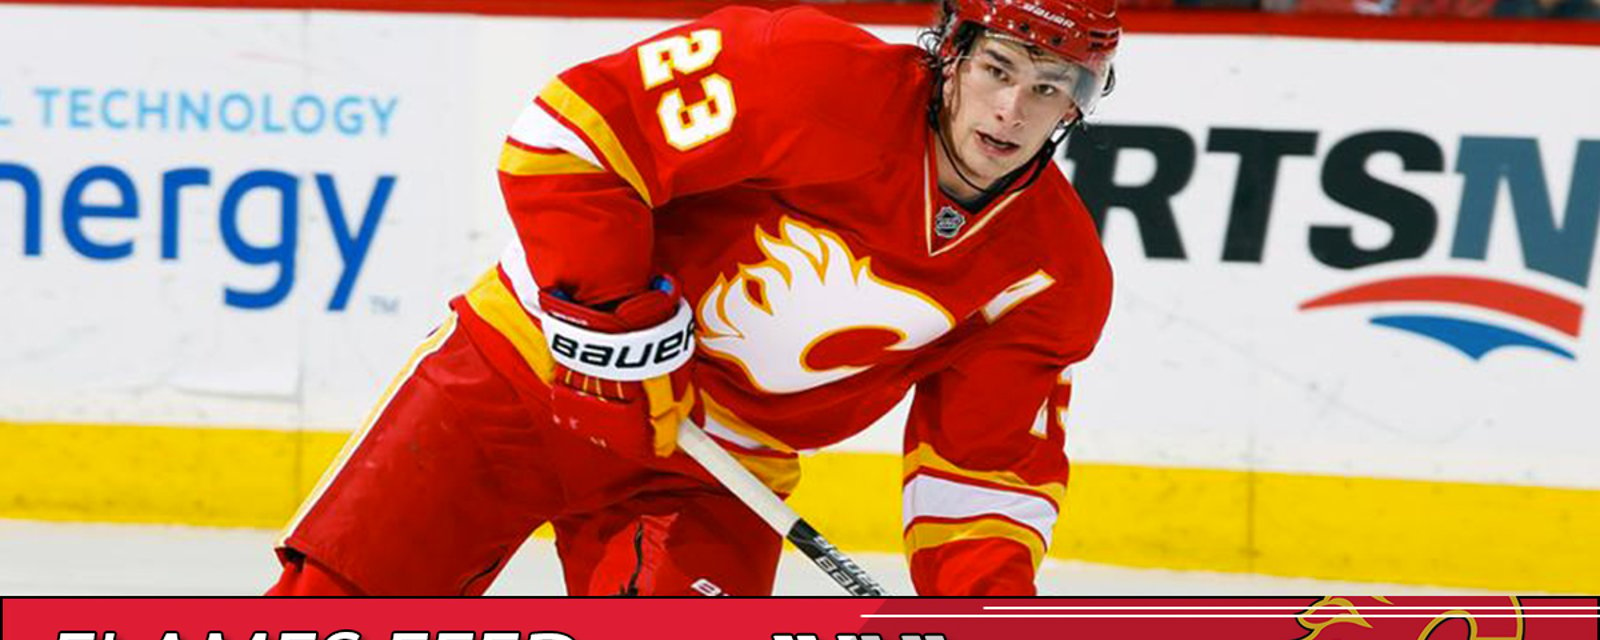 Sean Monahan had an historic game against the Flyers!